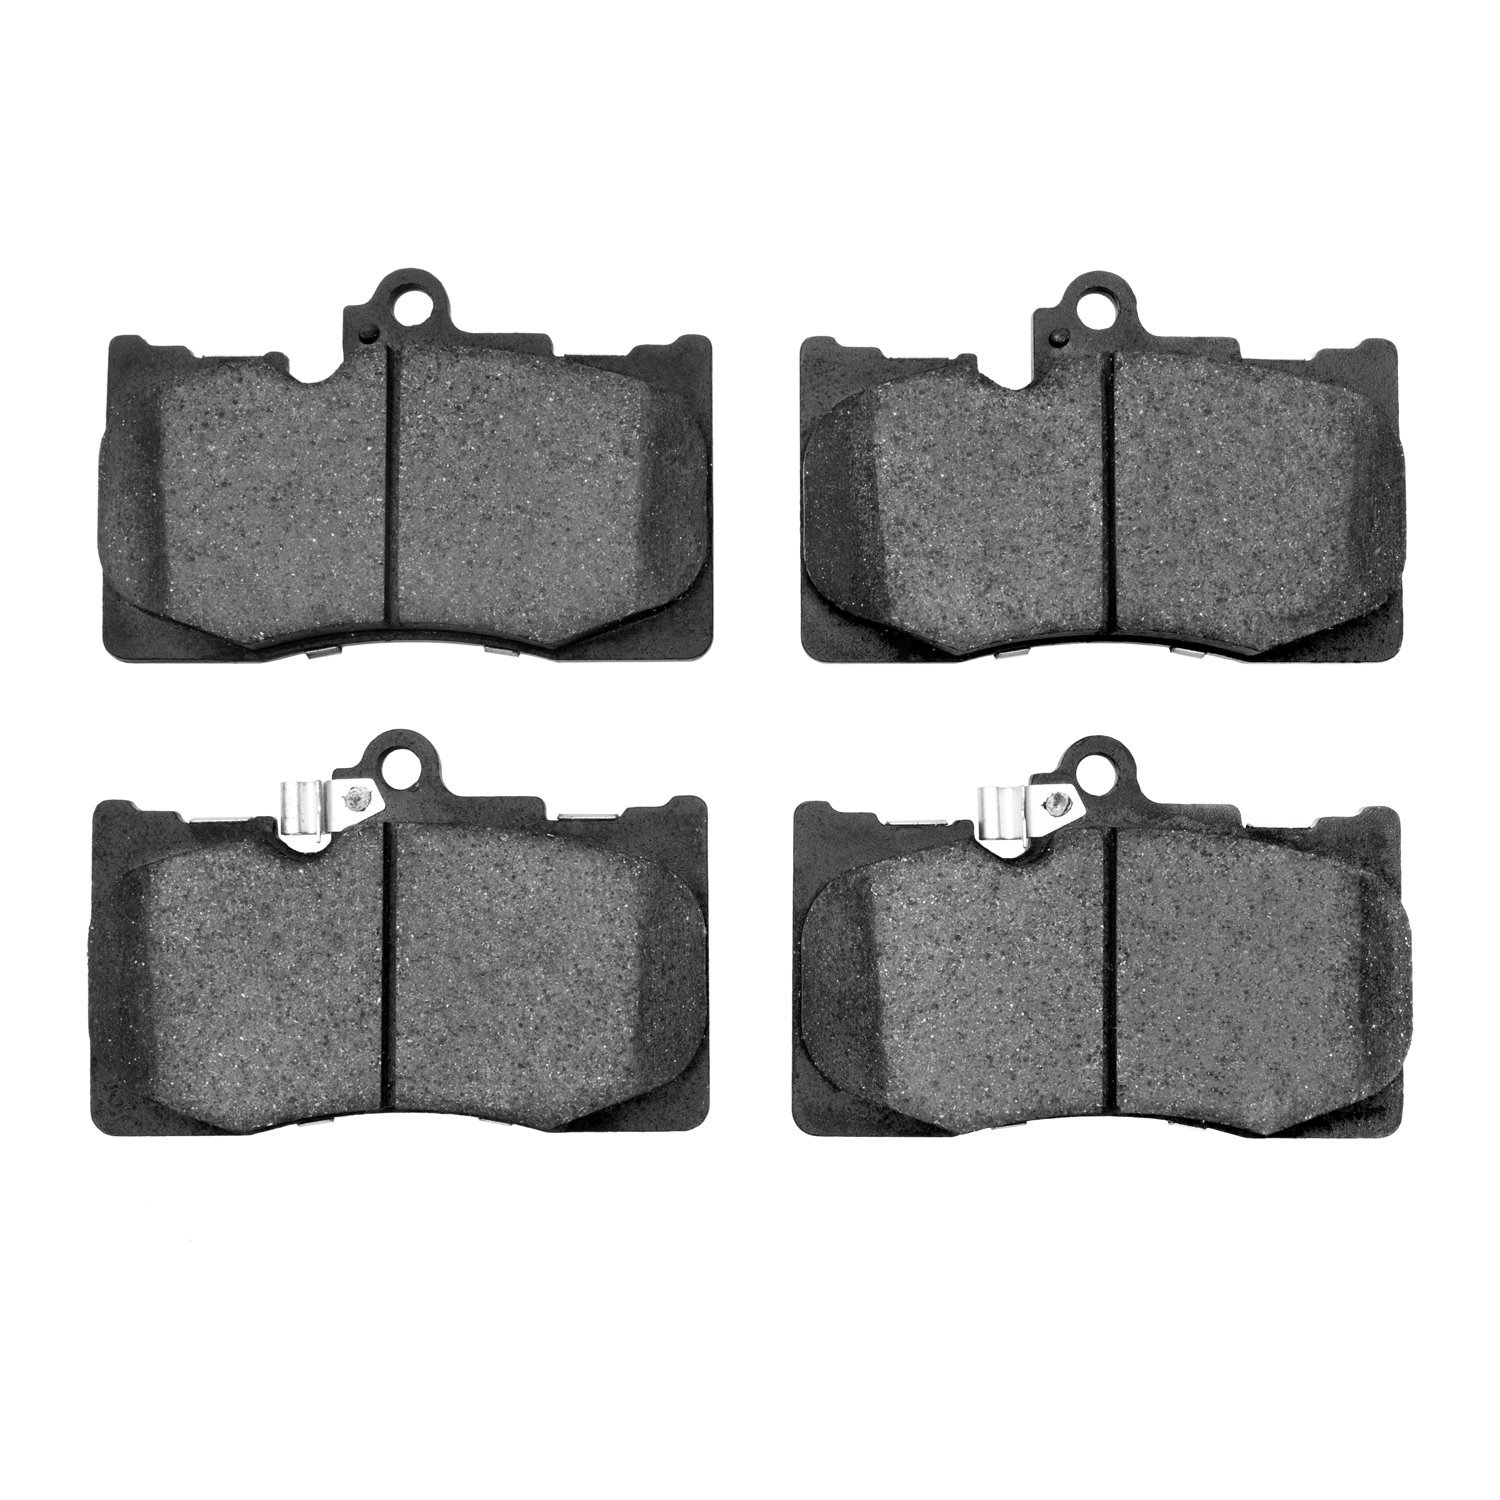 1902-1118-00 Parking Brake Shoes, Fits Select Ford/Lincoln/Mercury/Mazda, Position: Parking